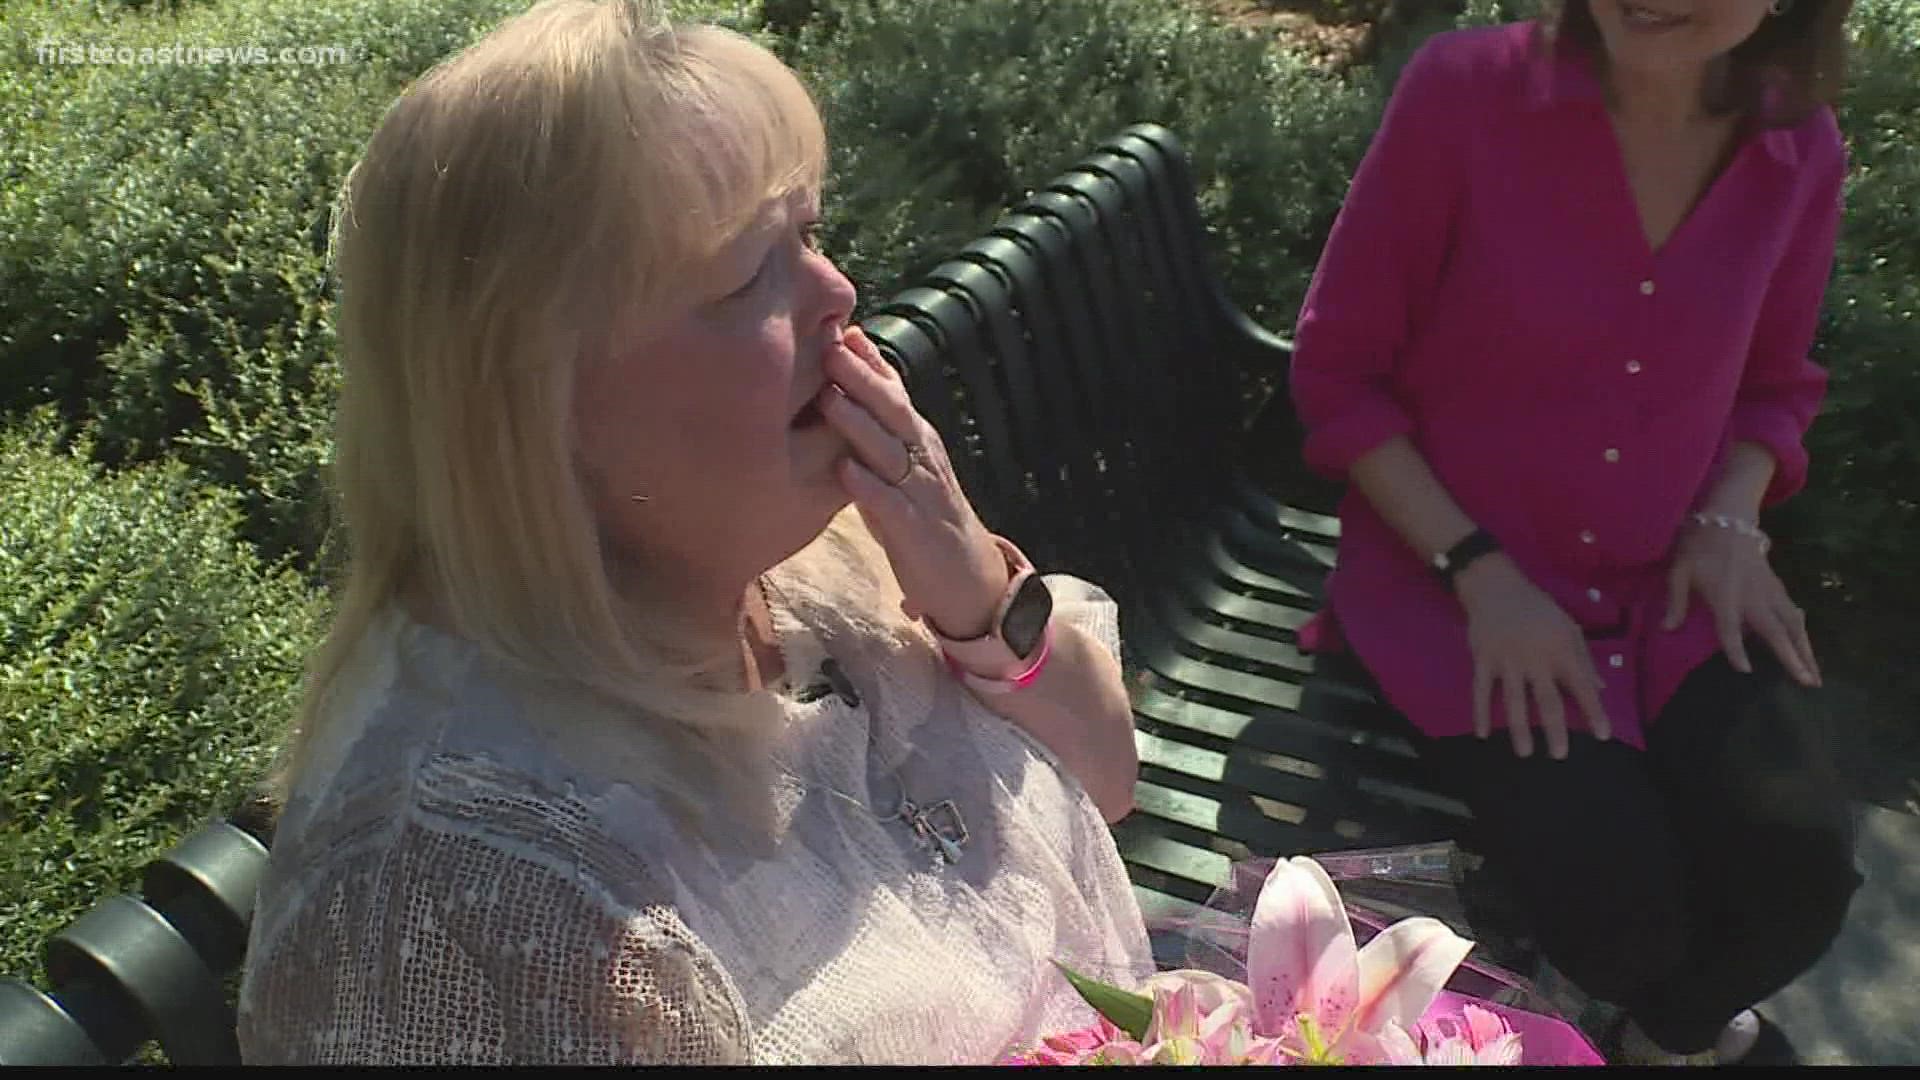 A special surprise for a breast cancer survivor brought her to tears.